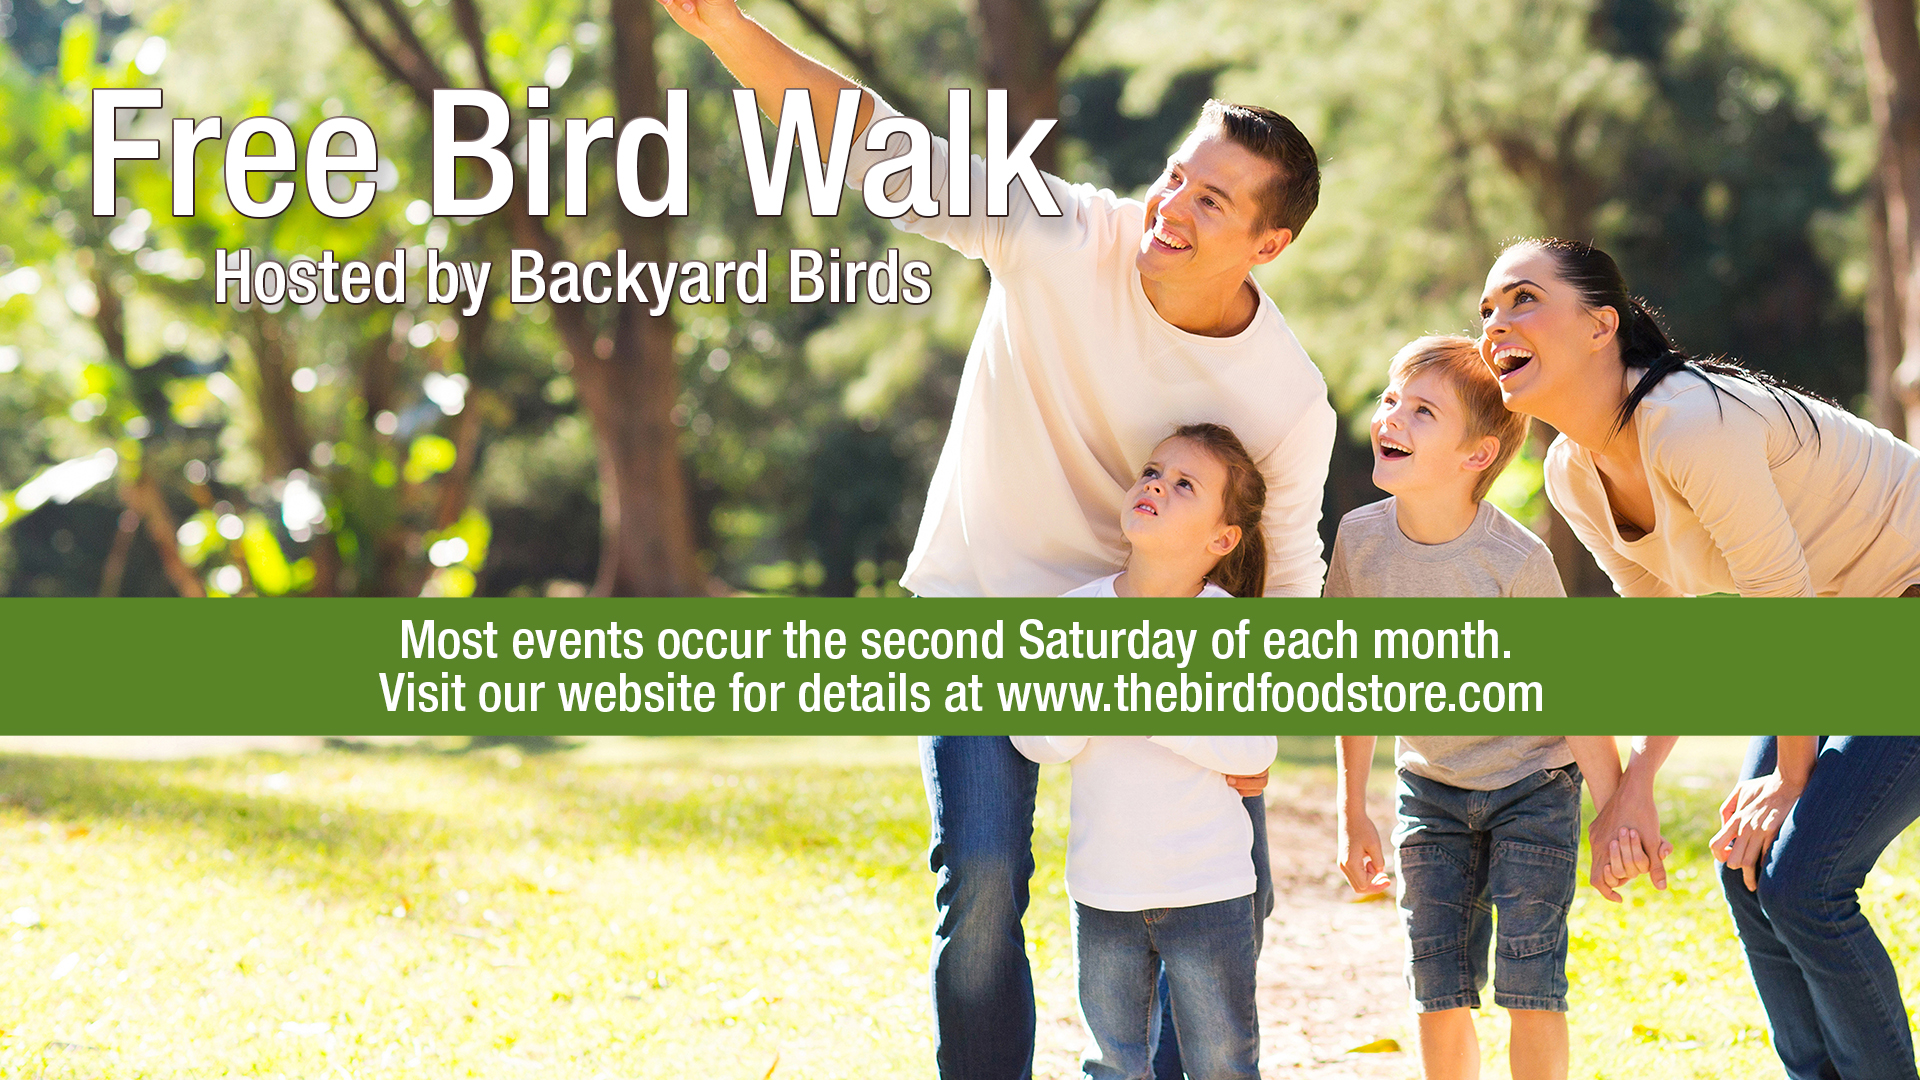 Family bird watching with mother, father, daughter, and son